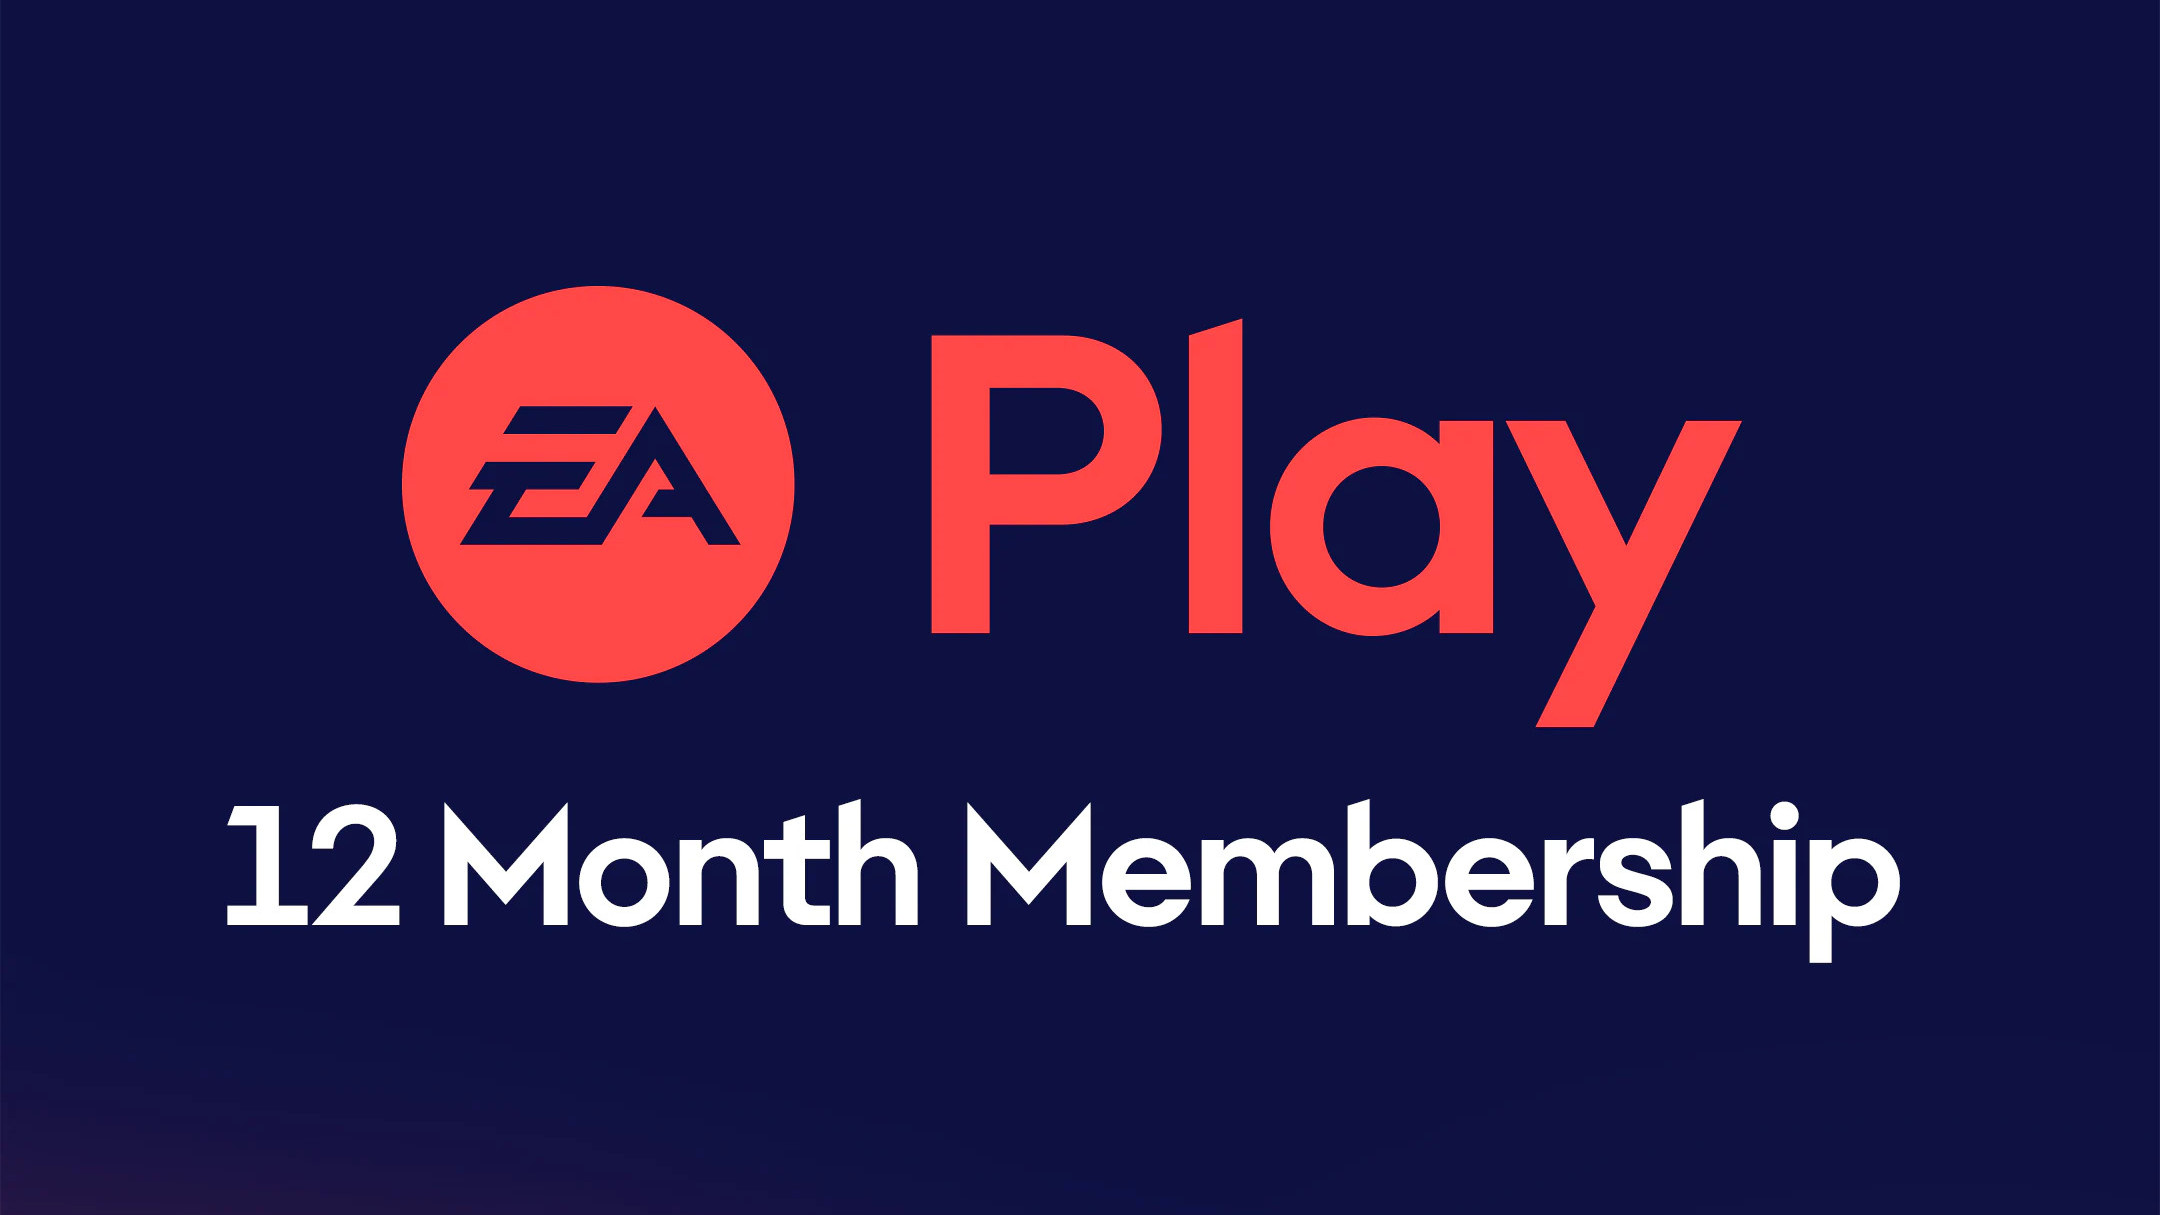 EA Play - 12 Months Subscription PlayStation 4/5 ACCOUNT 22.53 $